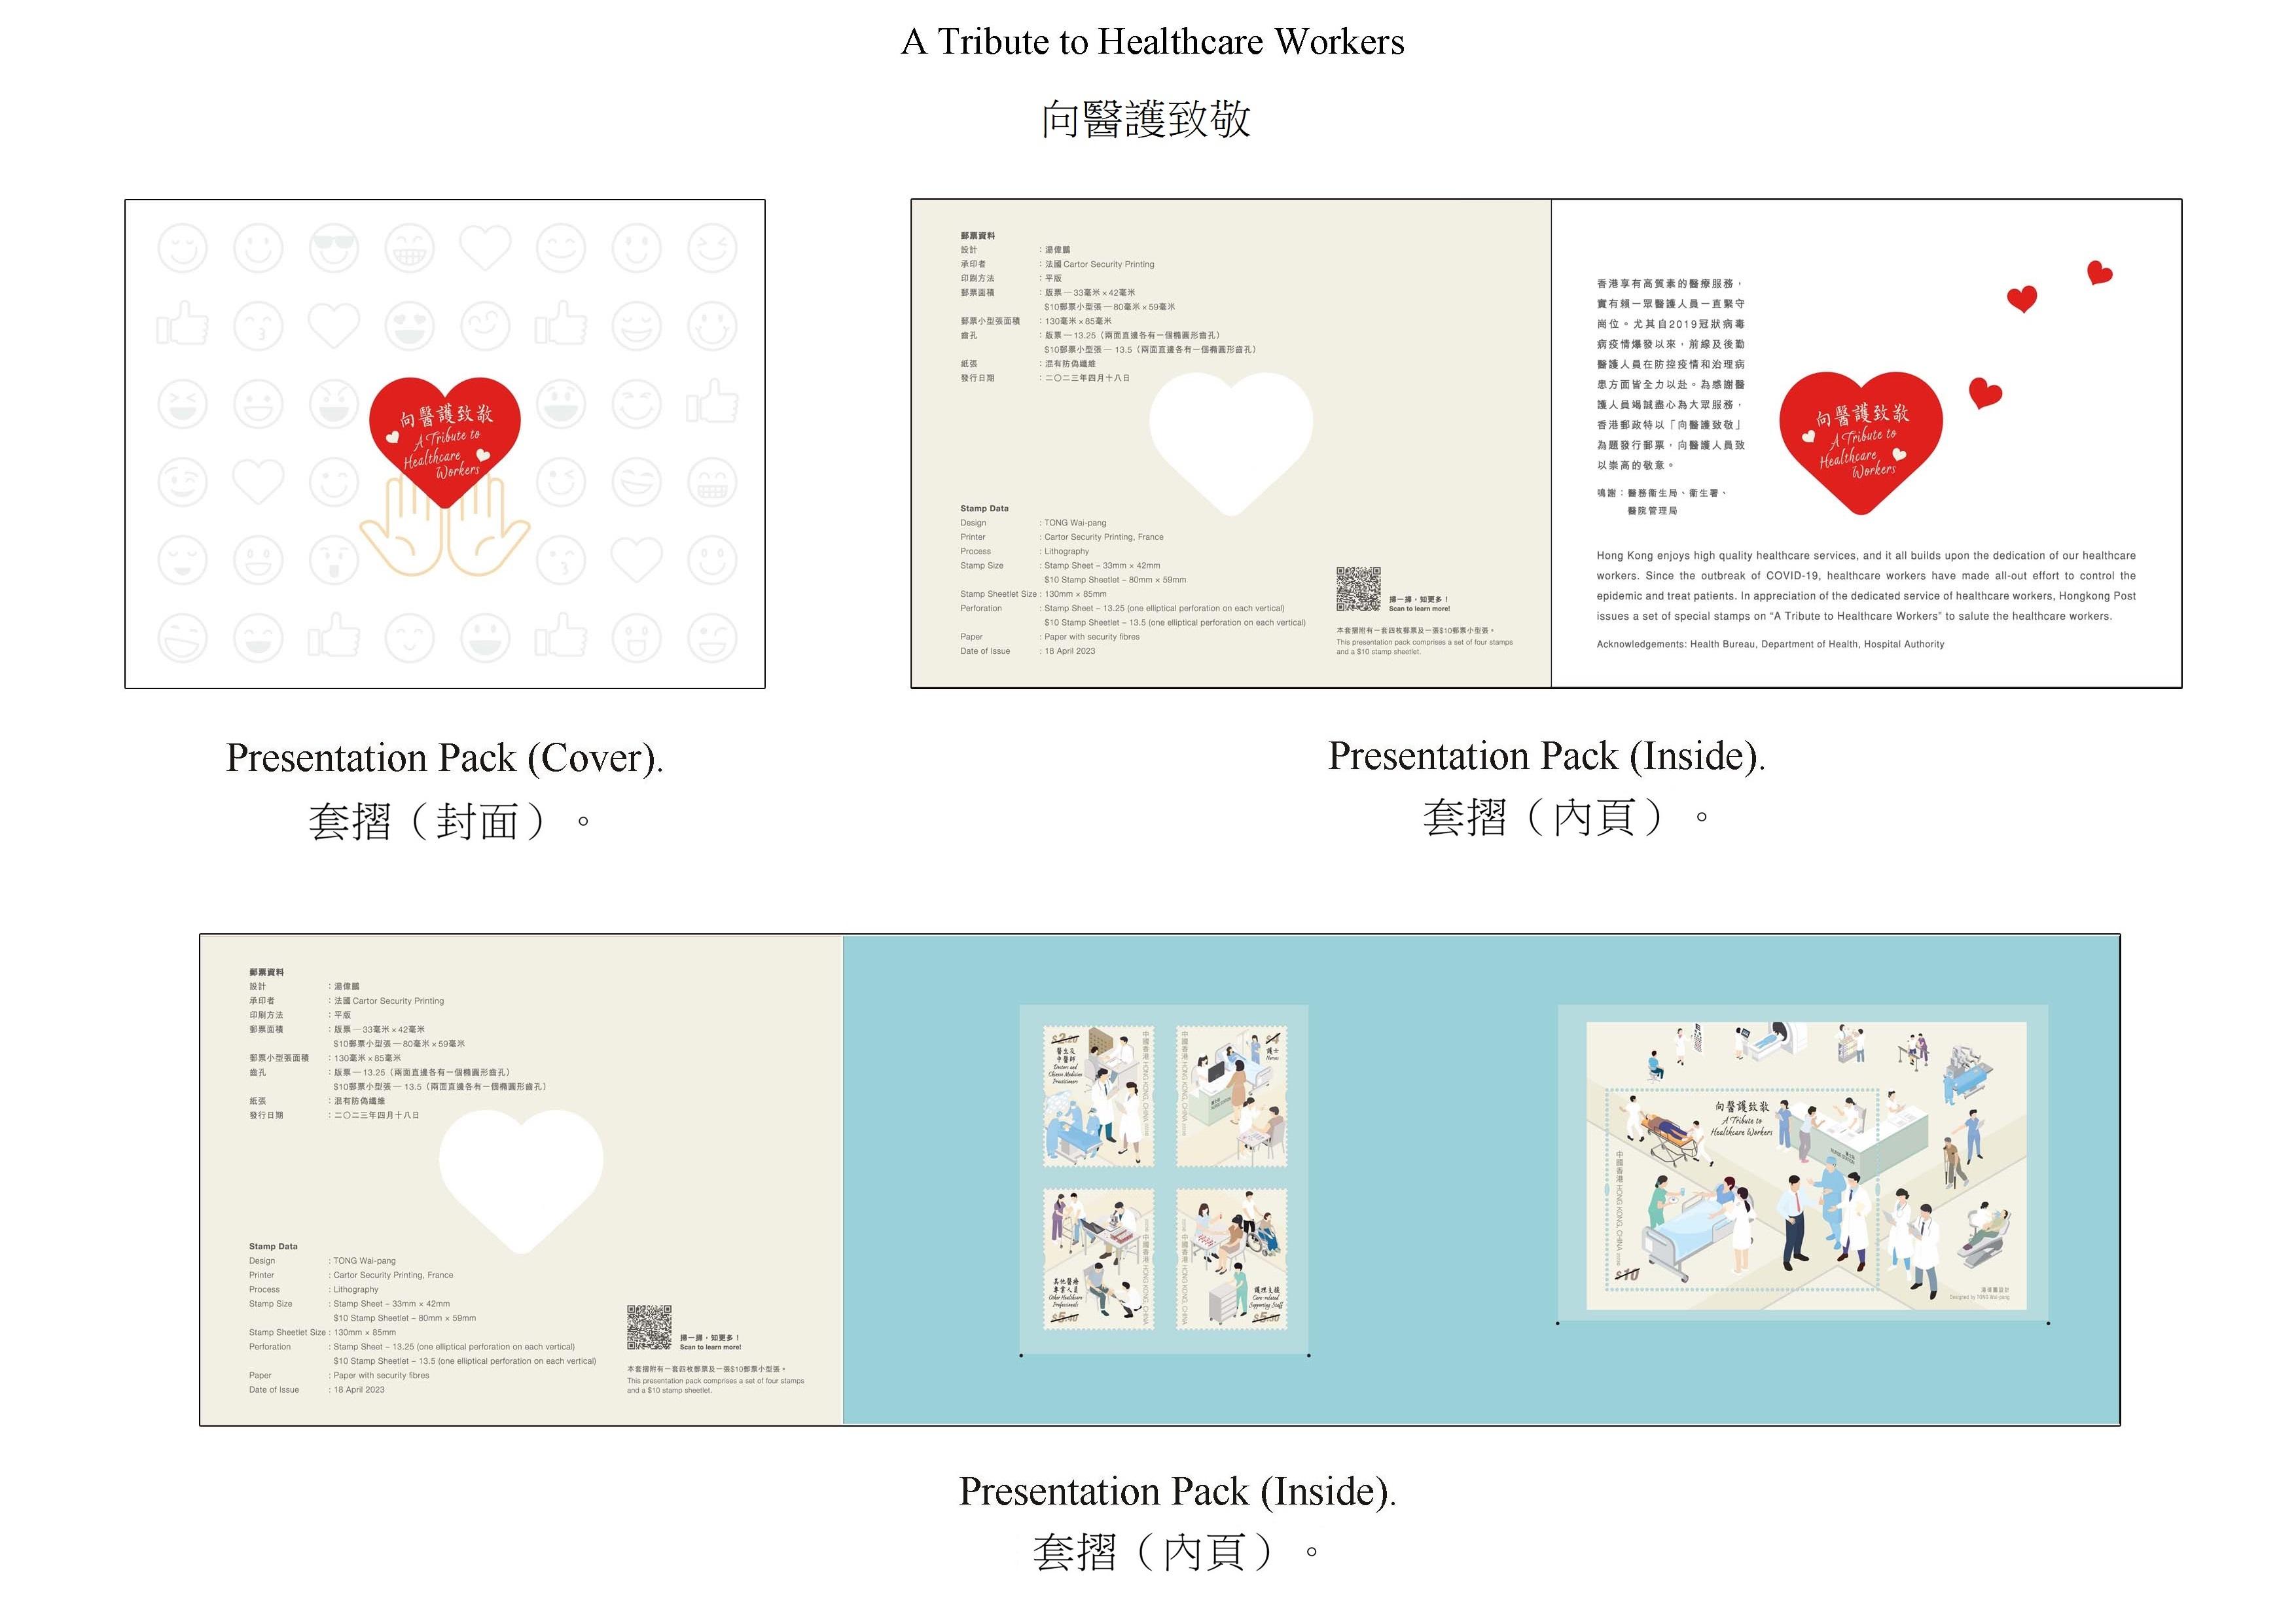 Hongkong Post will launch a special stamp issue and associated philatelic products on the theme of "A Tribute to Healthcare Workers" on April 18 (Tuesday). Photo shows the presentation pack.
